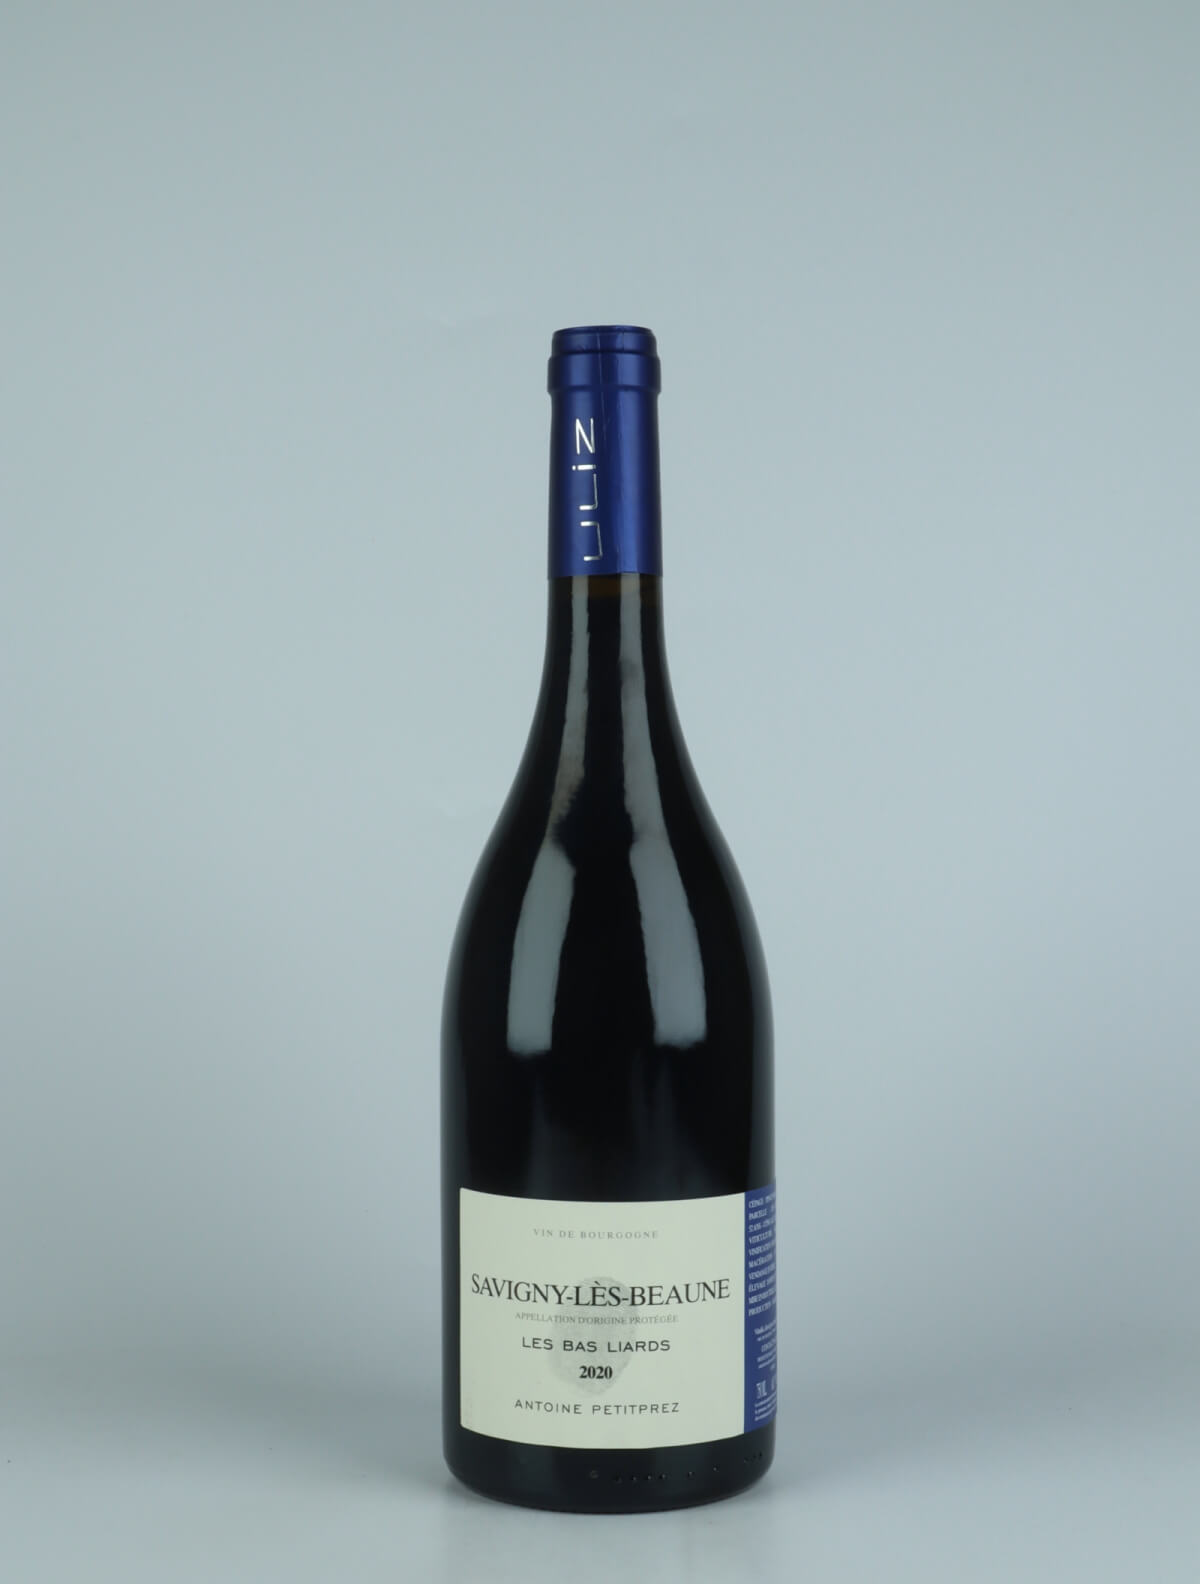 A bottle 2020 Savigny les Beaune - Les Bas Liards Red wine from Antoine Petitprez, Burgundy in France